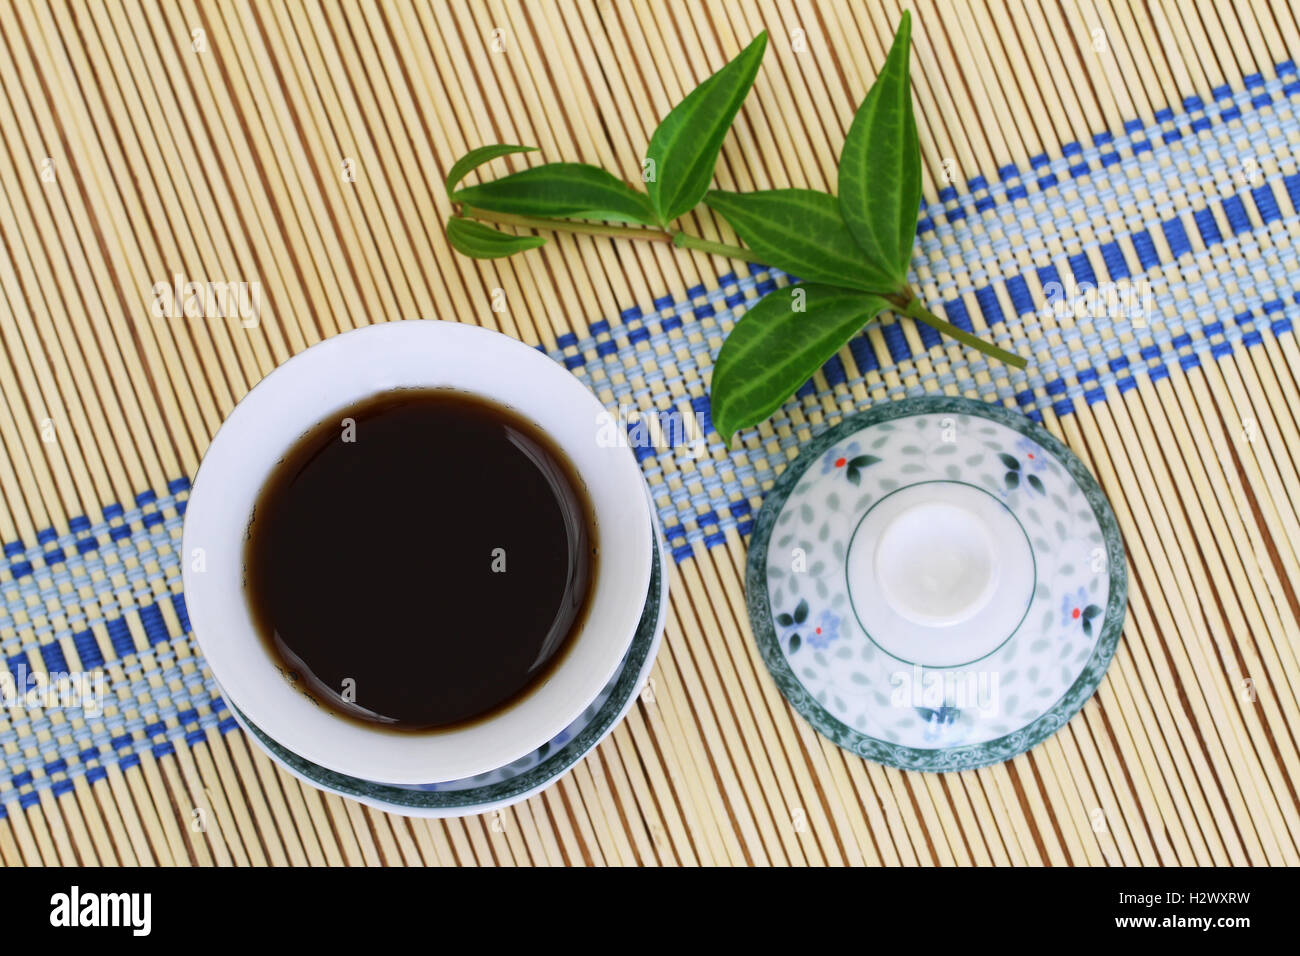 Strong tea in oriental cup on bamboo mat Stock Photo